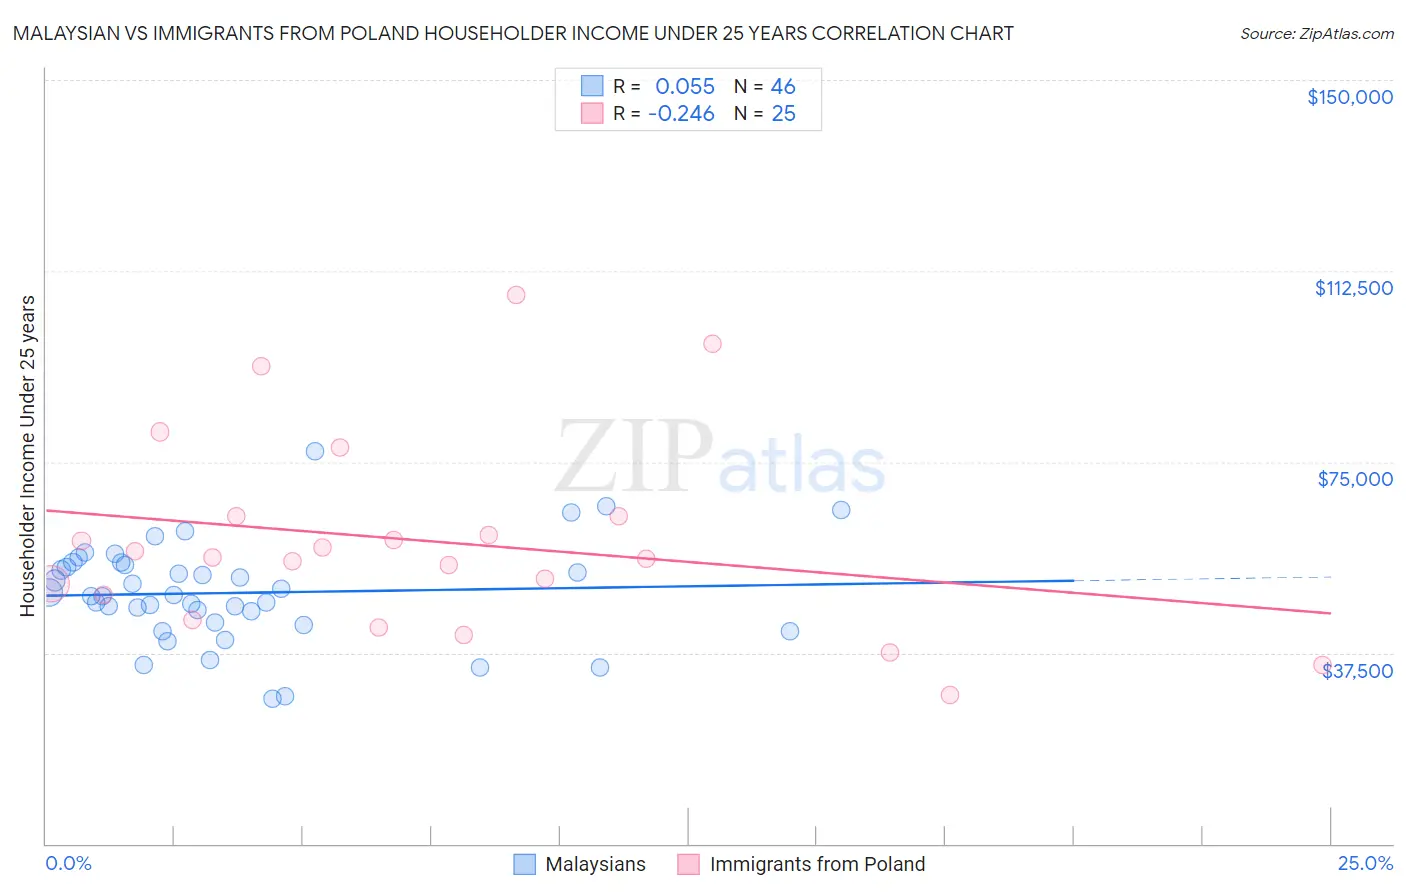 Malaysian vs Immigrants from Poland Householder Income Under 25 years